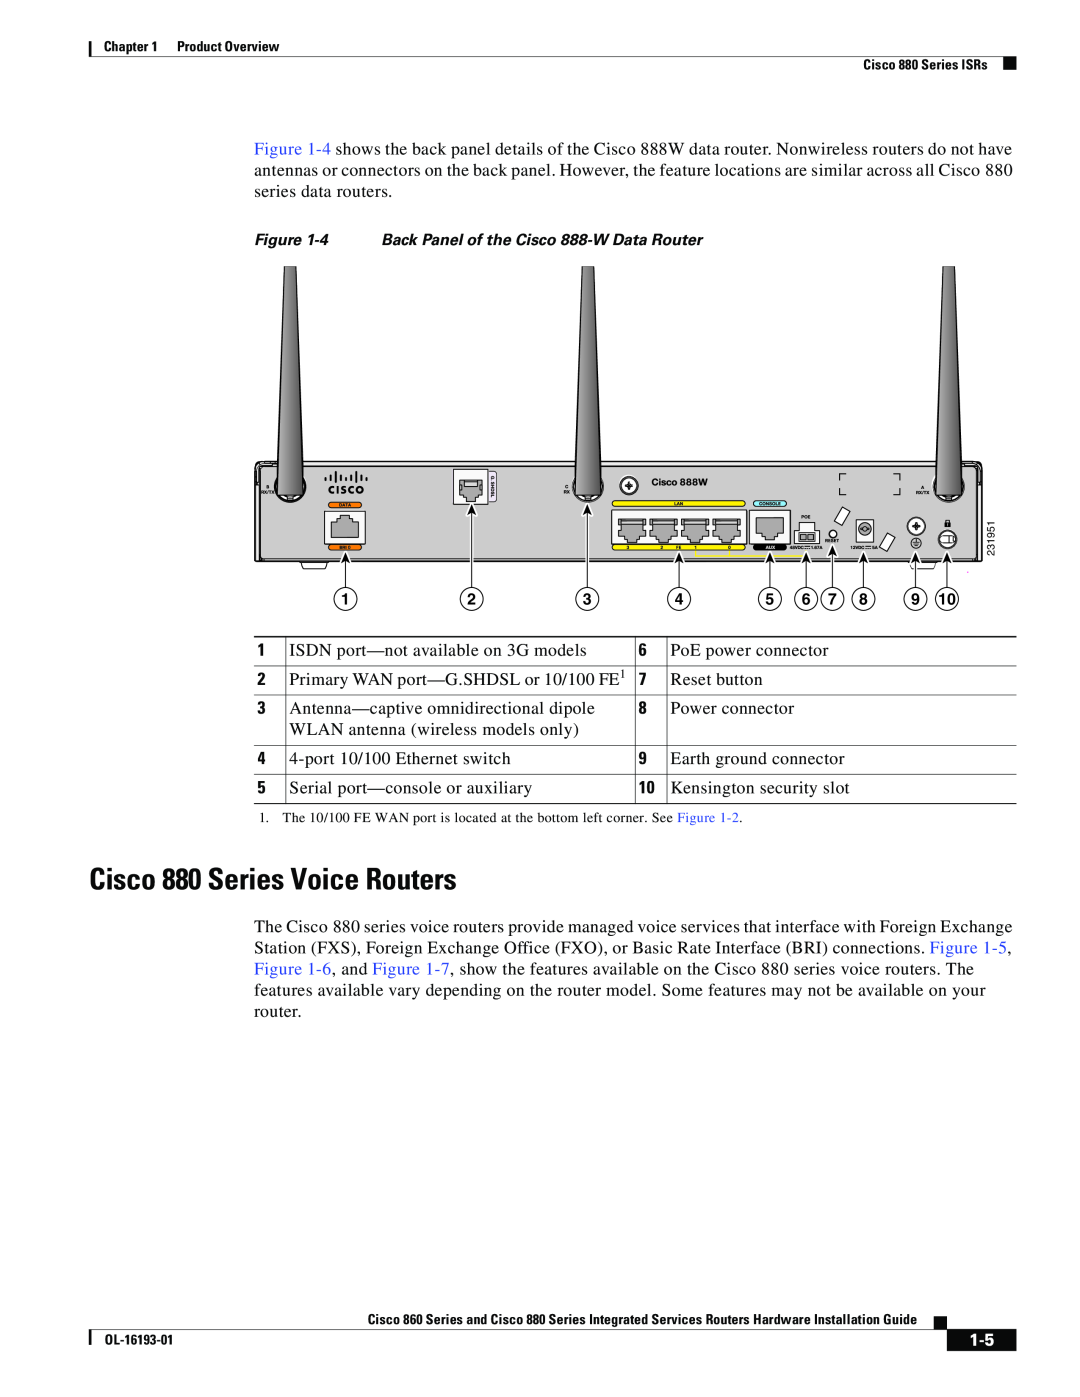 Cisco Systems HIG880, C892FSPK9, 861W, 860 Cisco 880 Series Voice Routers, 4 Back Panel of the Cisco 888-W Data Router 